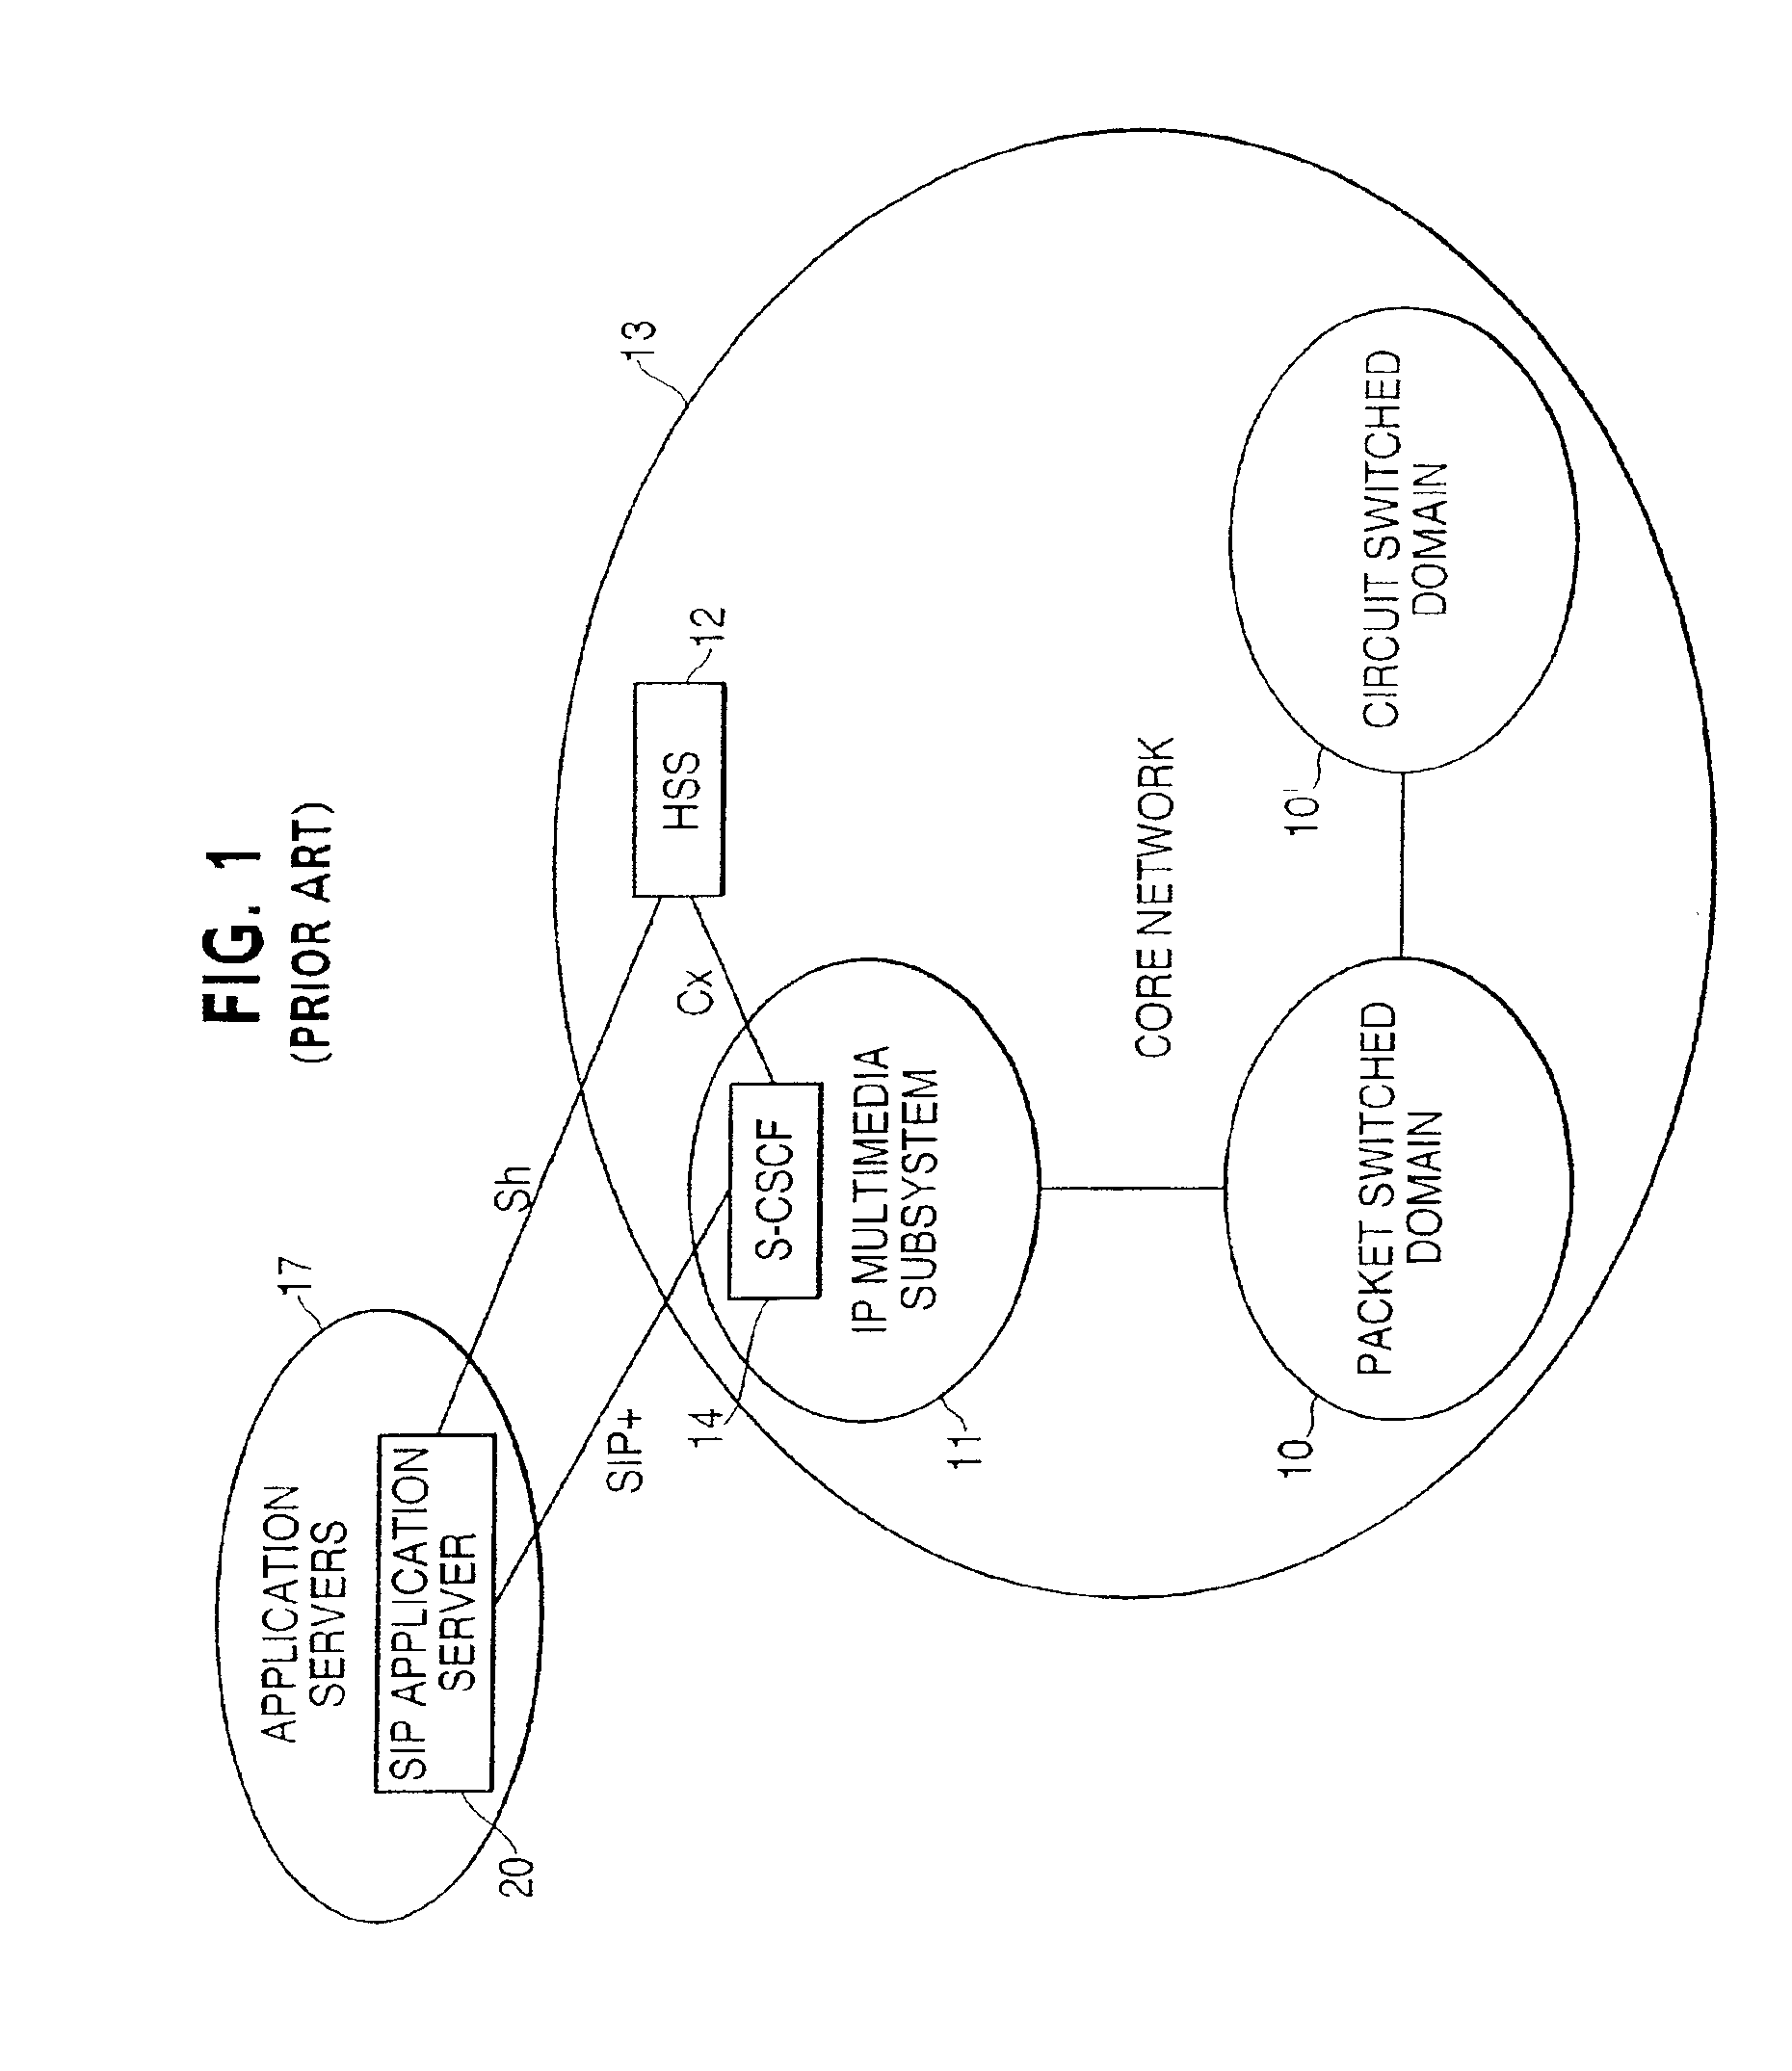 System and method for providing at least one service obtained from a service network for a user in a packet switched communication network